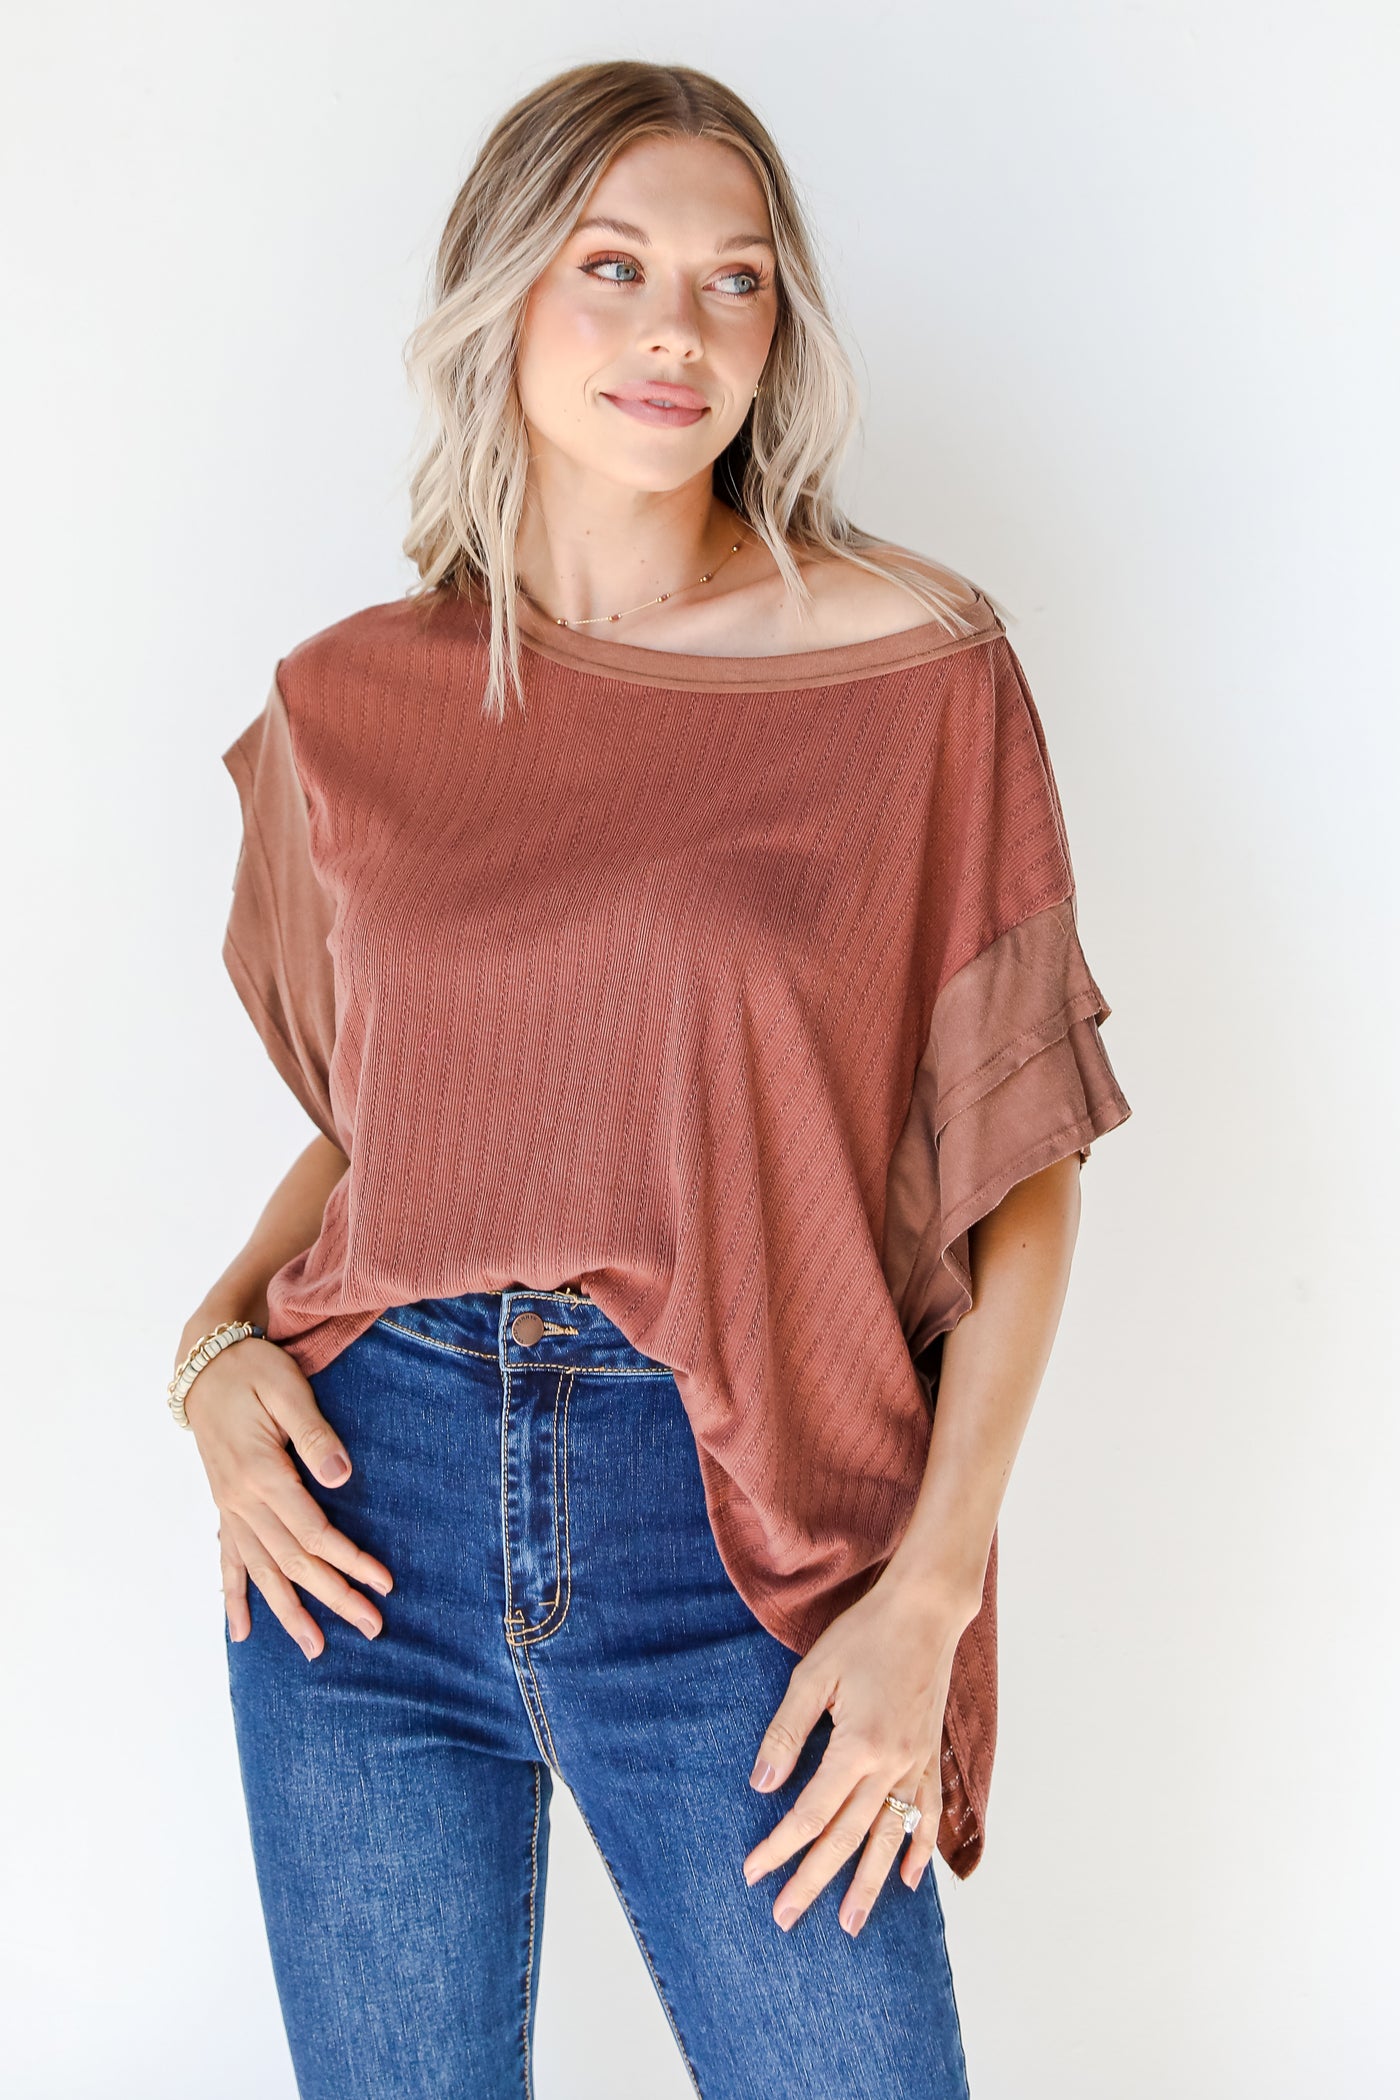 model wearing a brown knit top with dark wash jeans